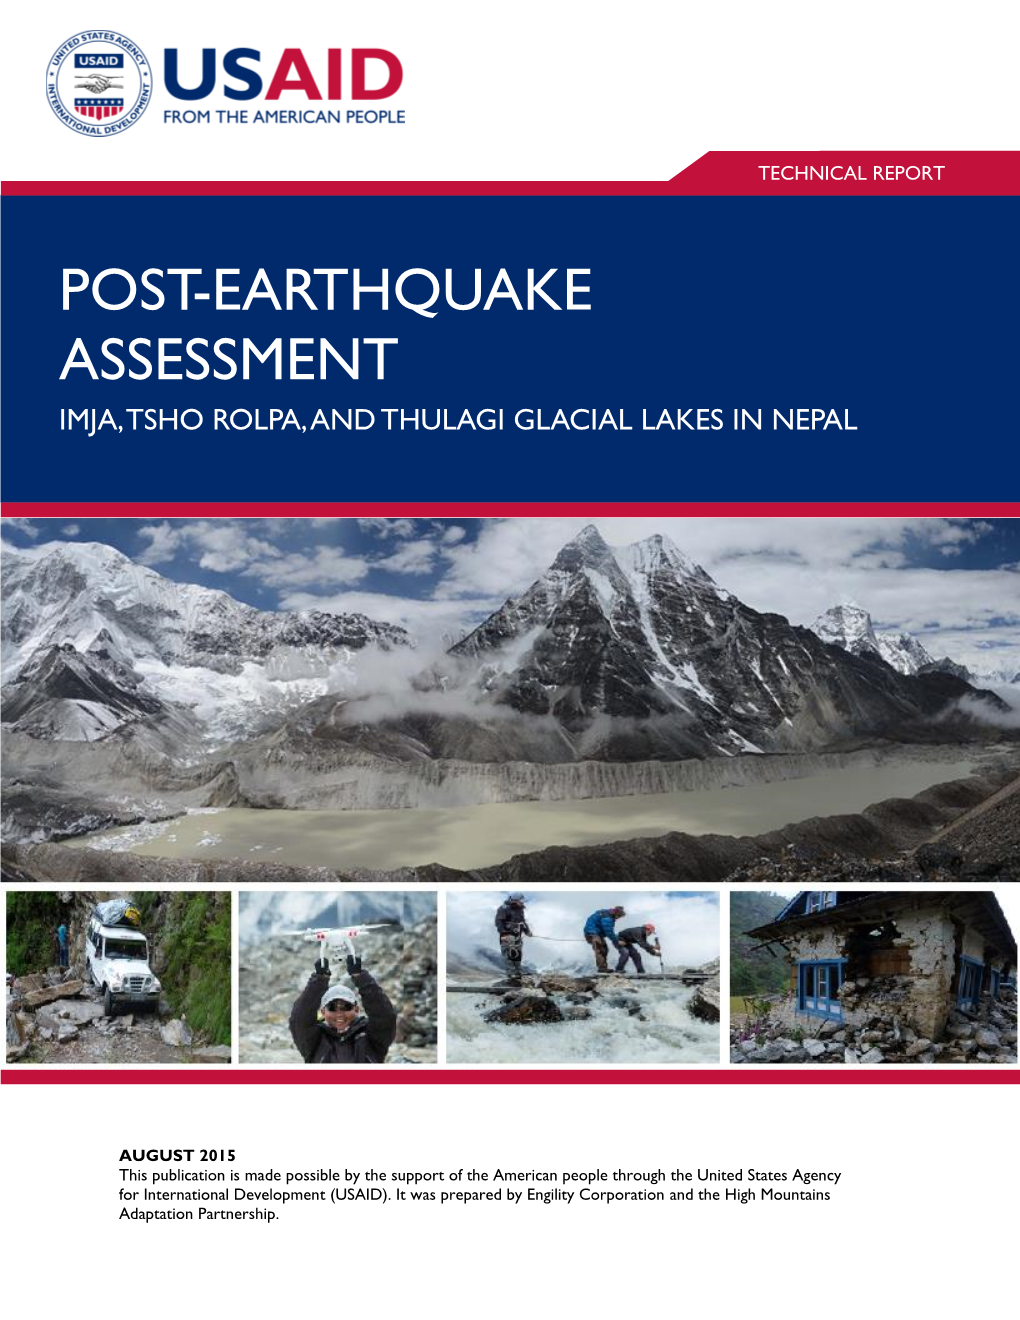 Post-Nepal Earthquake Assessment Report for USAID